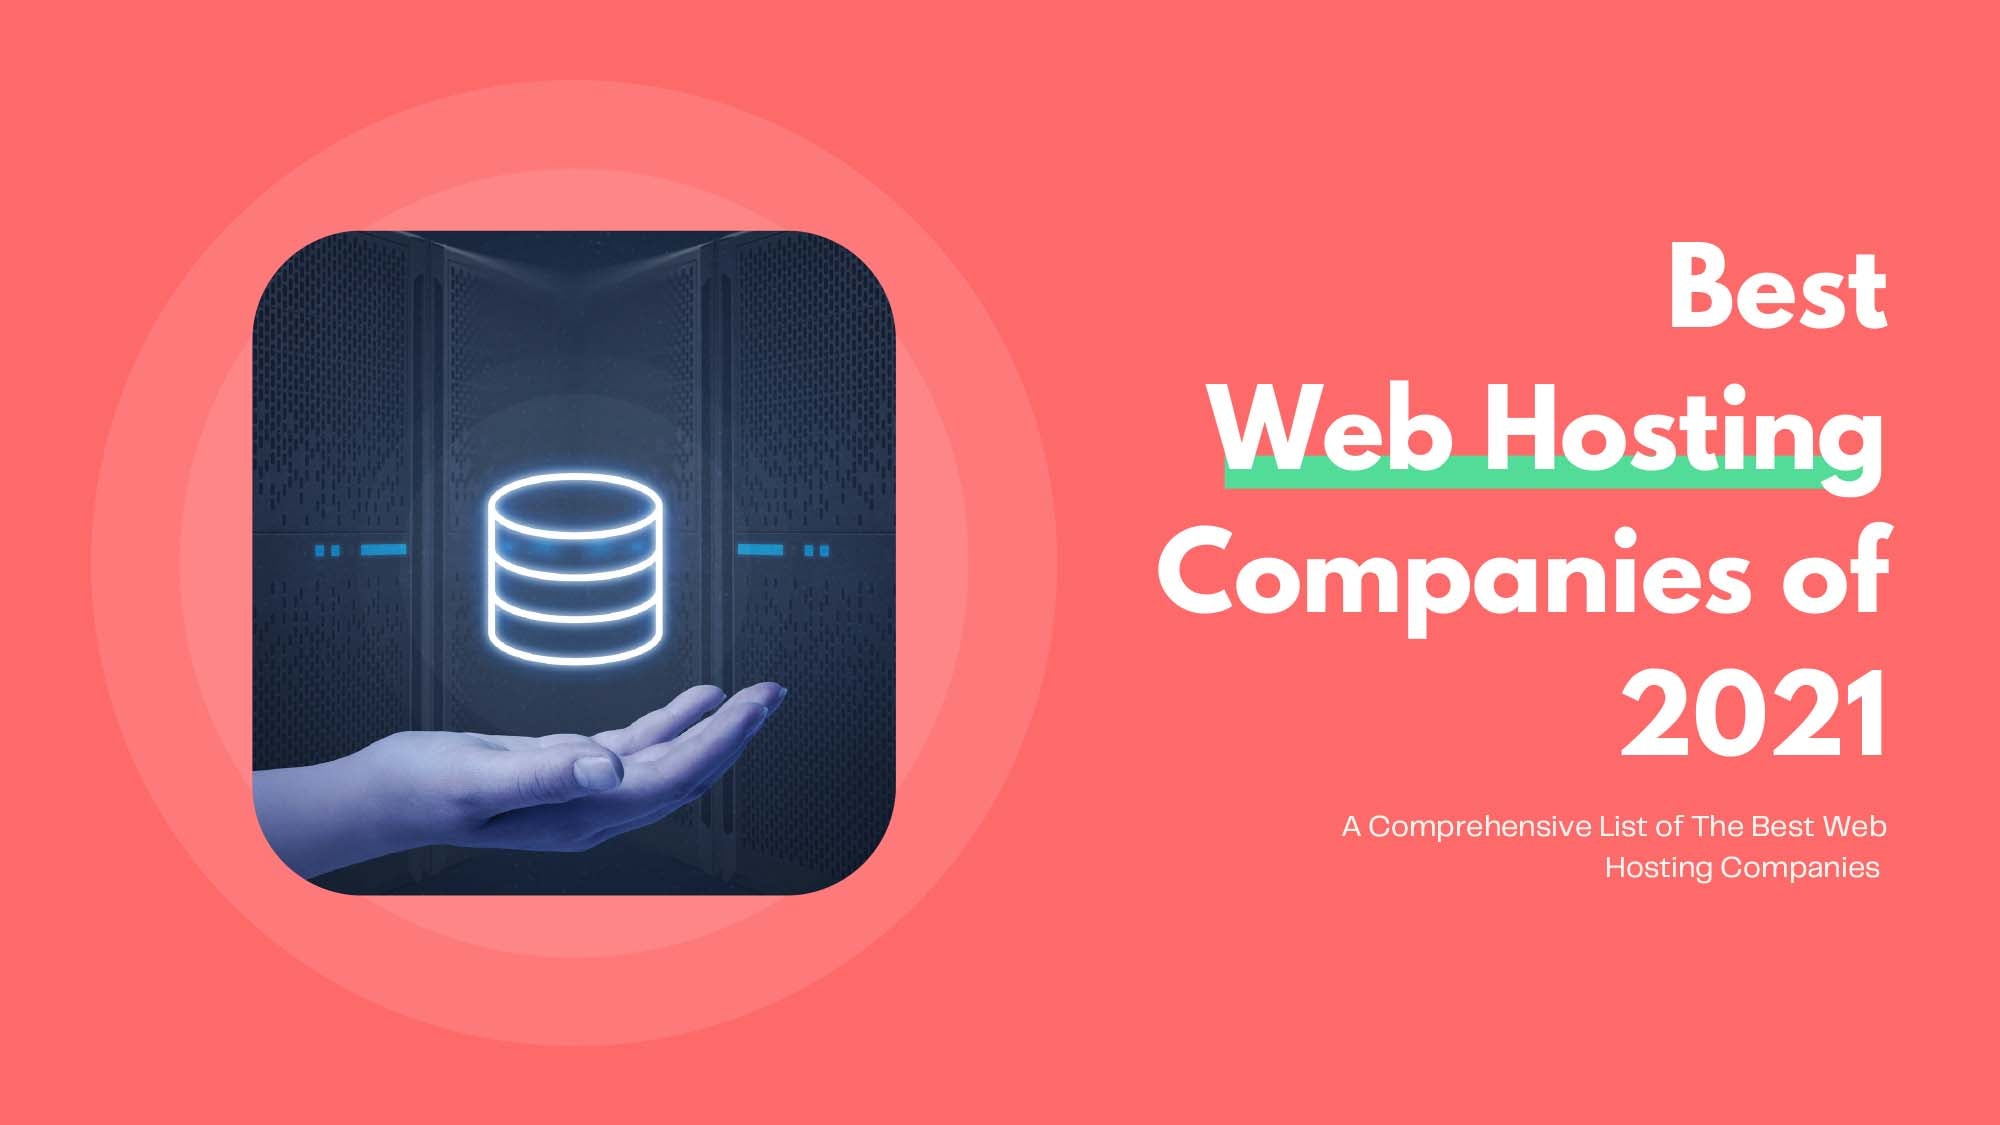 4 Best Web Hosting Companies of 2021 For Small Businesses